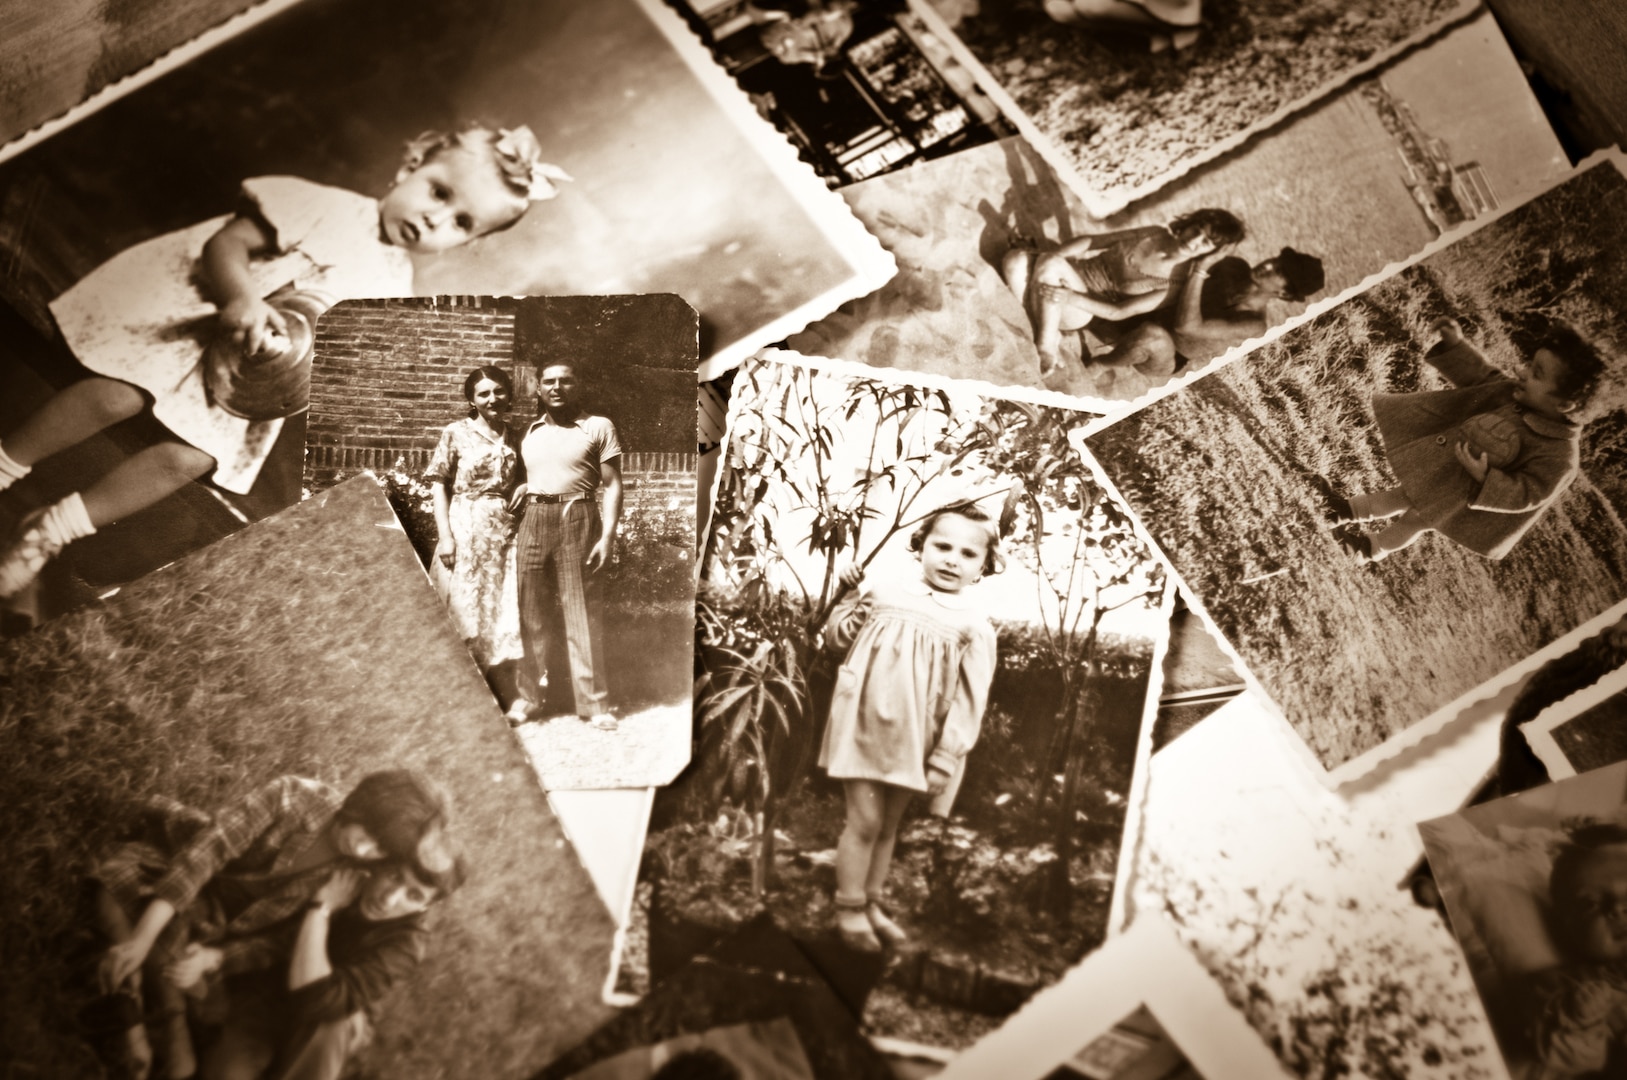 Vintage family photos show a connection to the past through genealogy. (Courtesy Graphic)